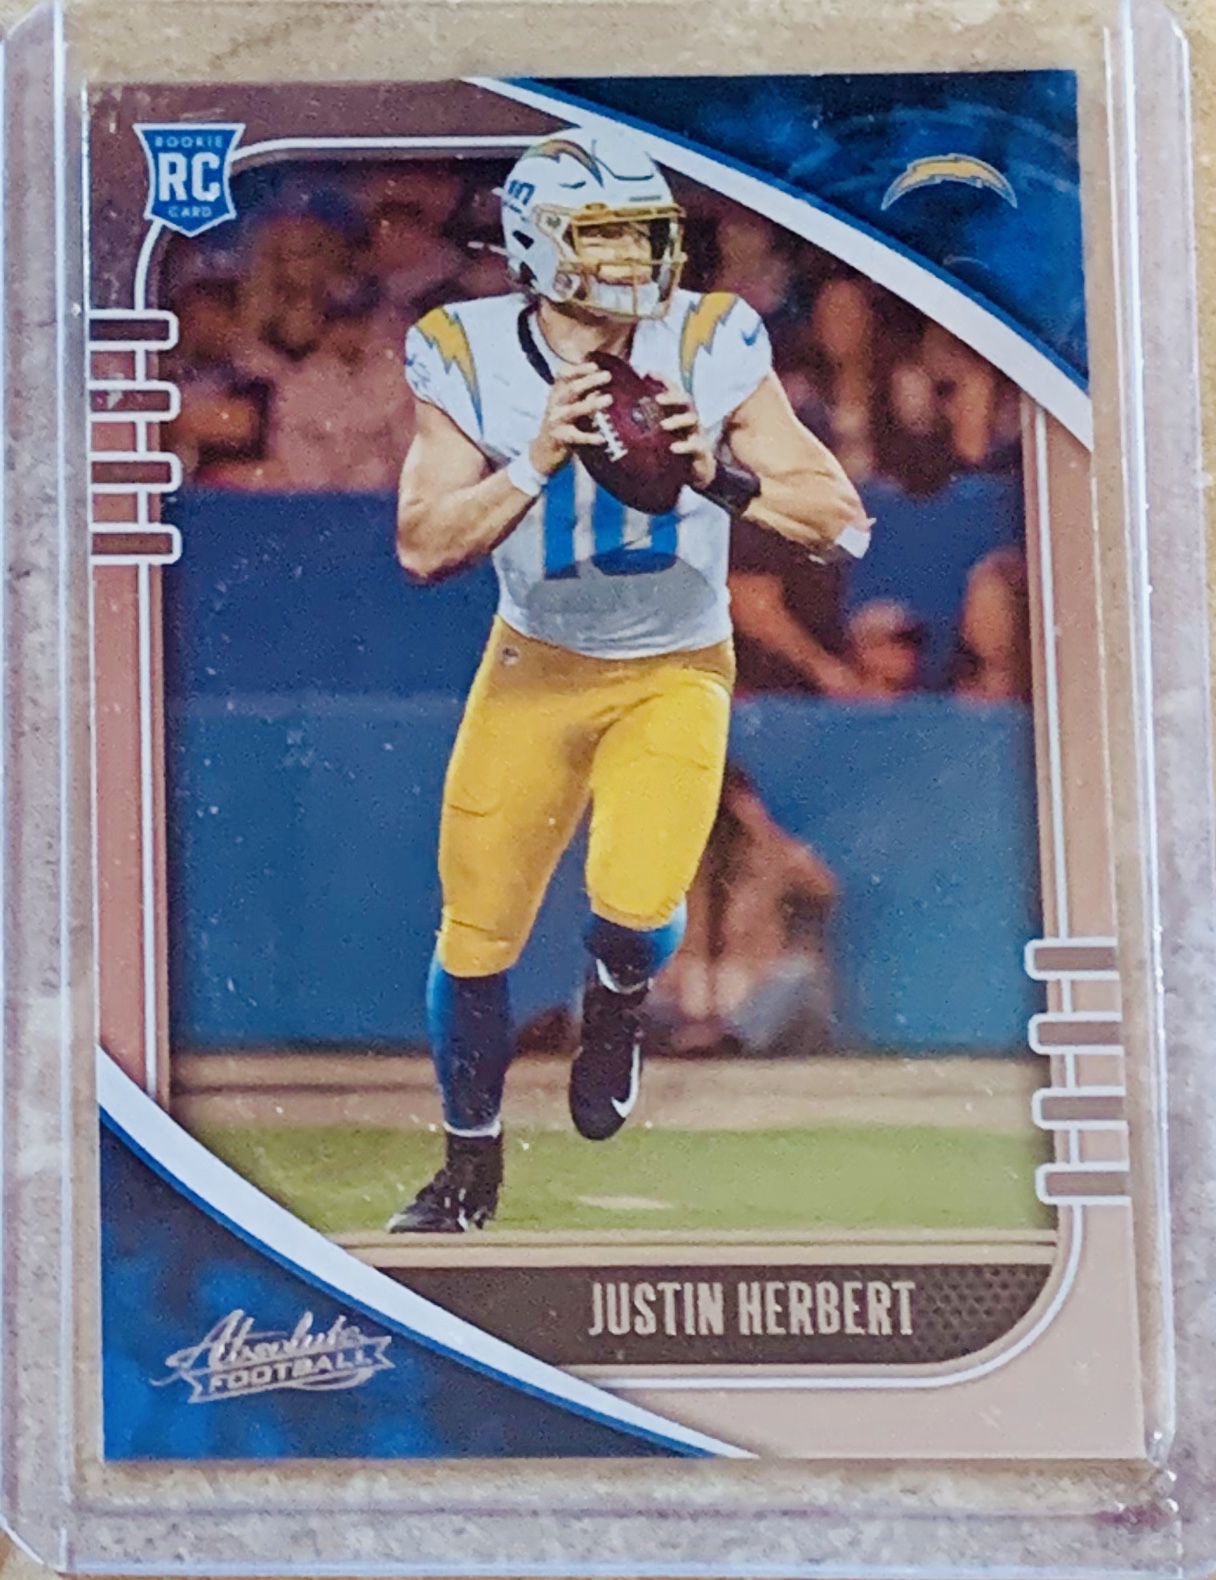 NFL 2020 Panini Absolute Football Los Angeles Chargers Justin Herbert Rookie Card